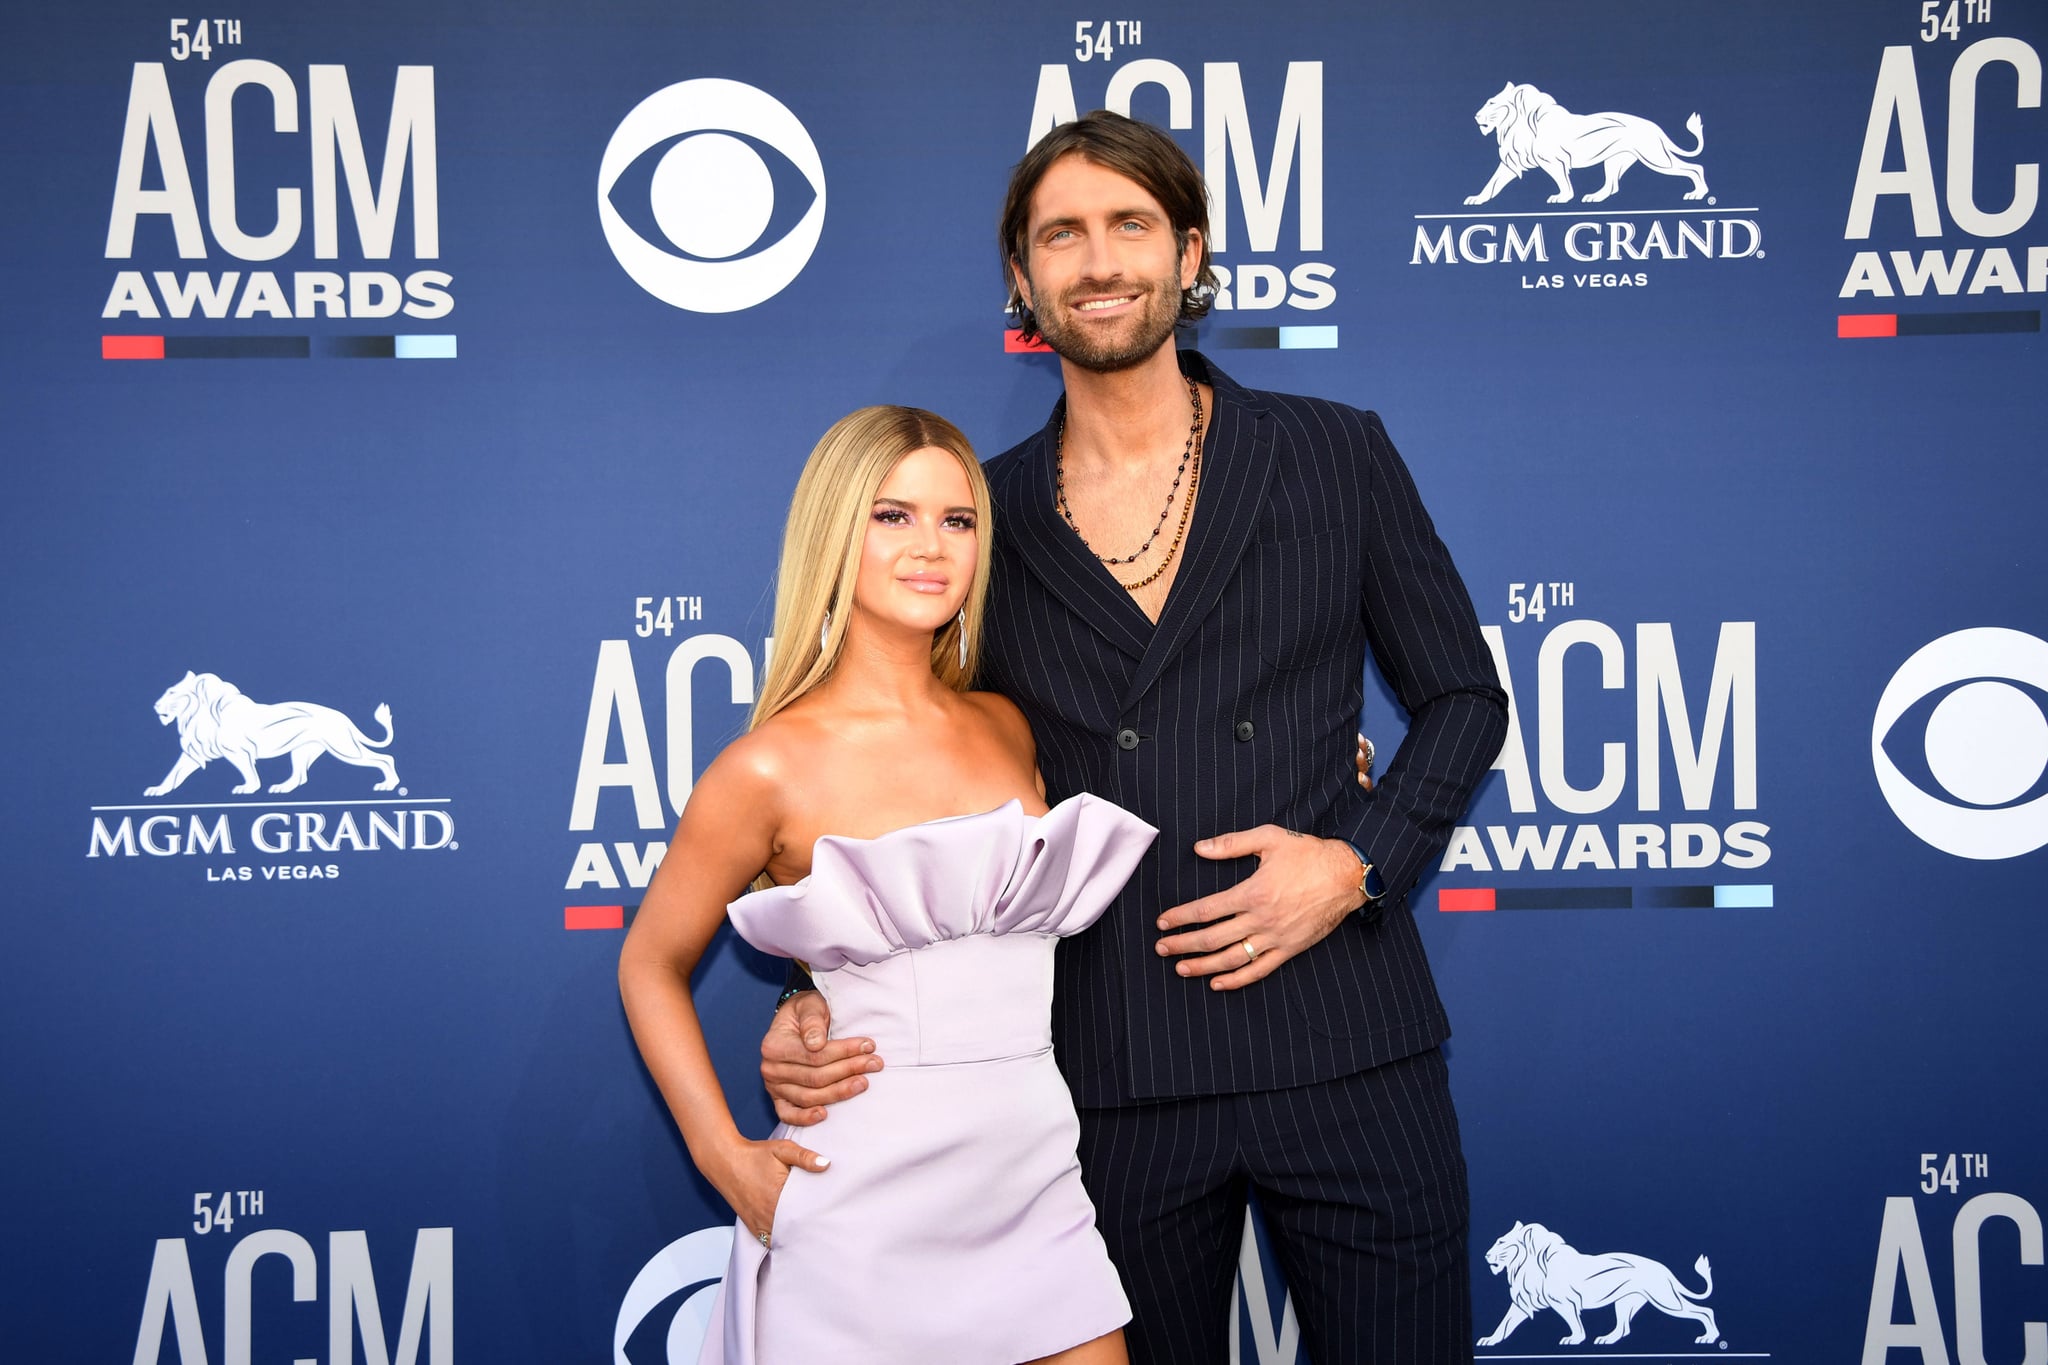 US singer Maren Morris (L) and US singer Ryan Hurd arrive for the 54th Academy of Country Music Awards on April 7, 2019, at the MGM Grand Garden Arena in Las Vegas, Nevada. (Photo by Robyn Beck / AFP)        (Photo credit should read ROBYN BECK/AFP/Getty Images)